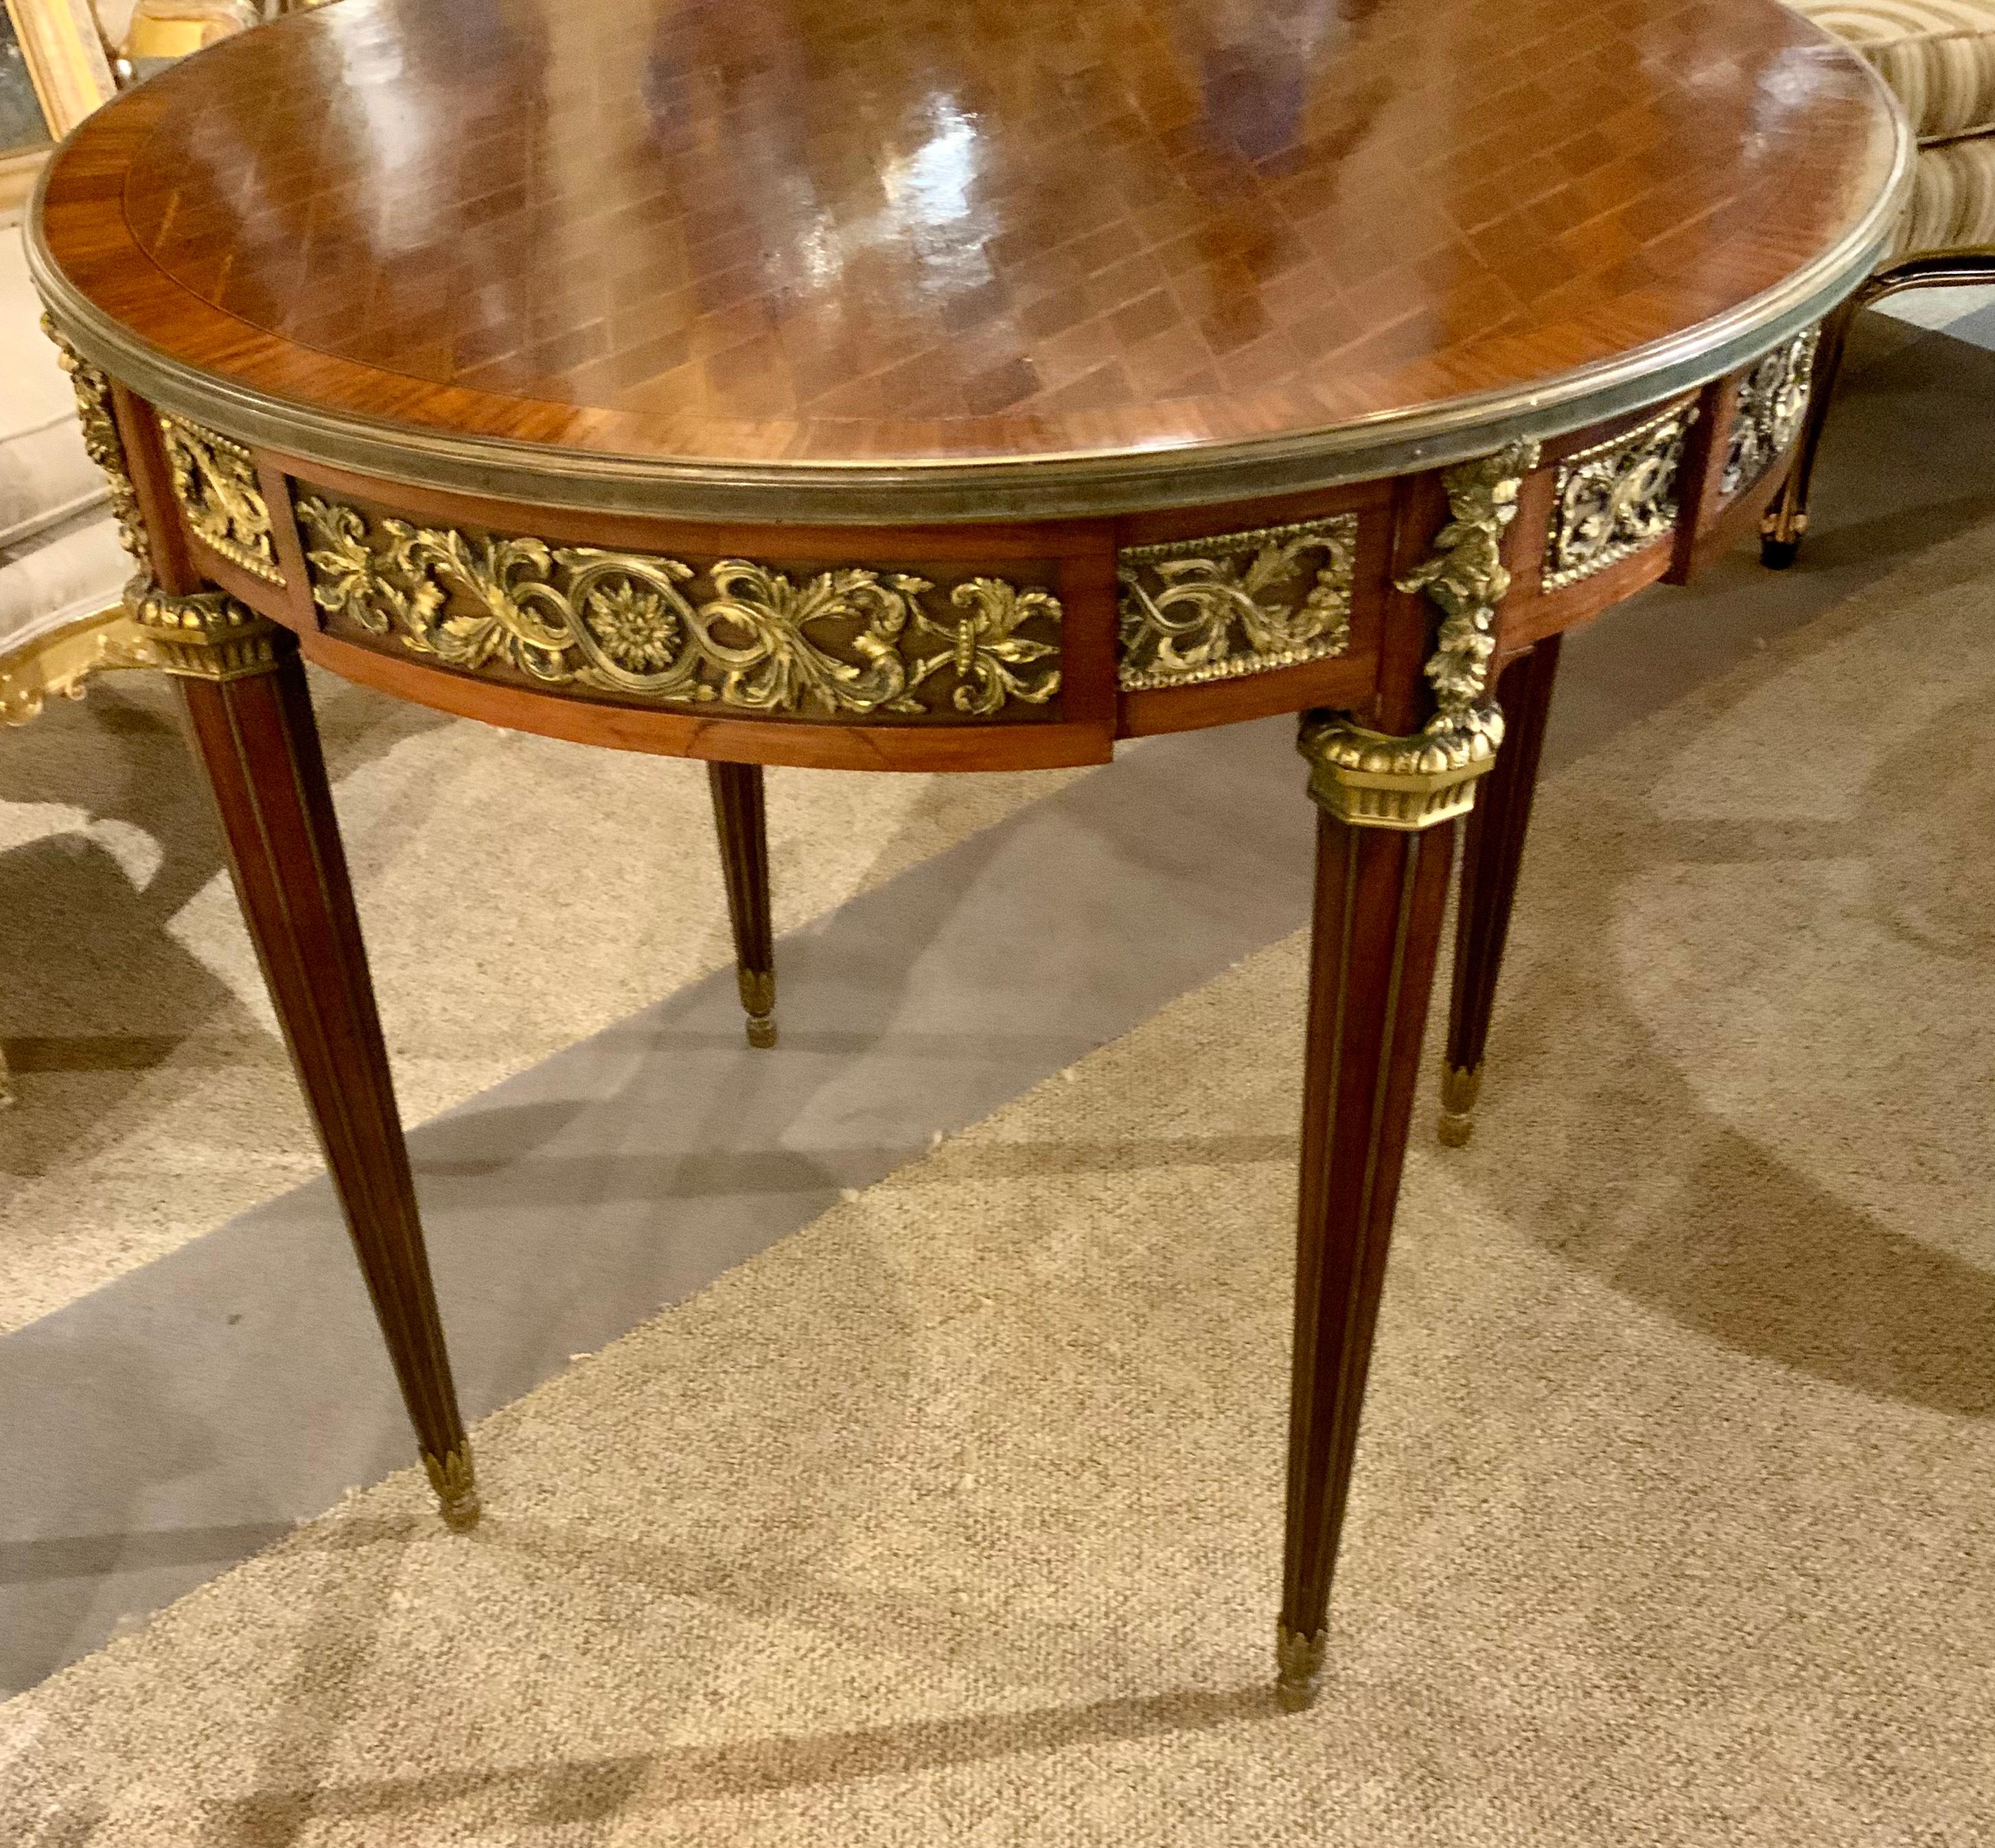 20th Century Louis XVI-Style Center Table in Kingwood with Ormolu Mounts For Sale